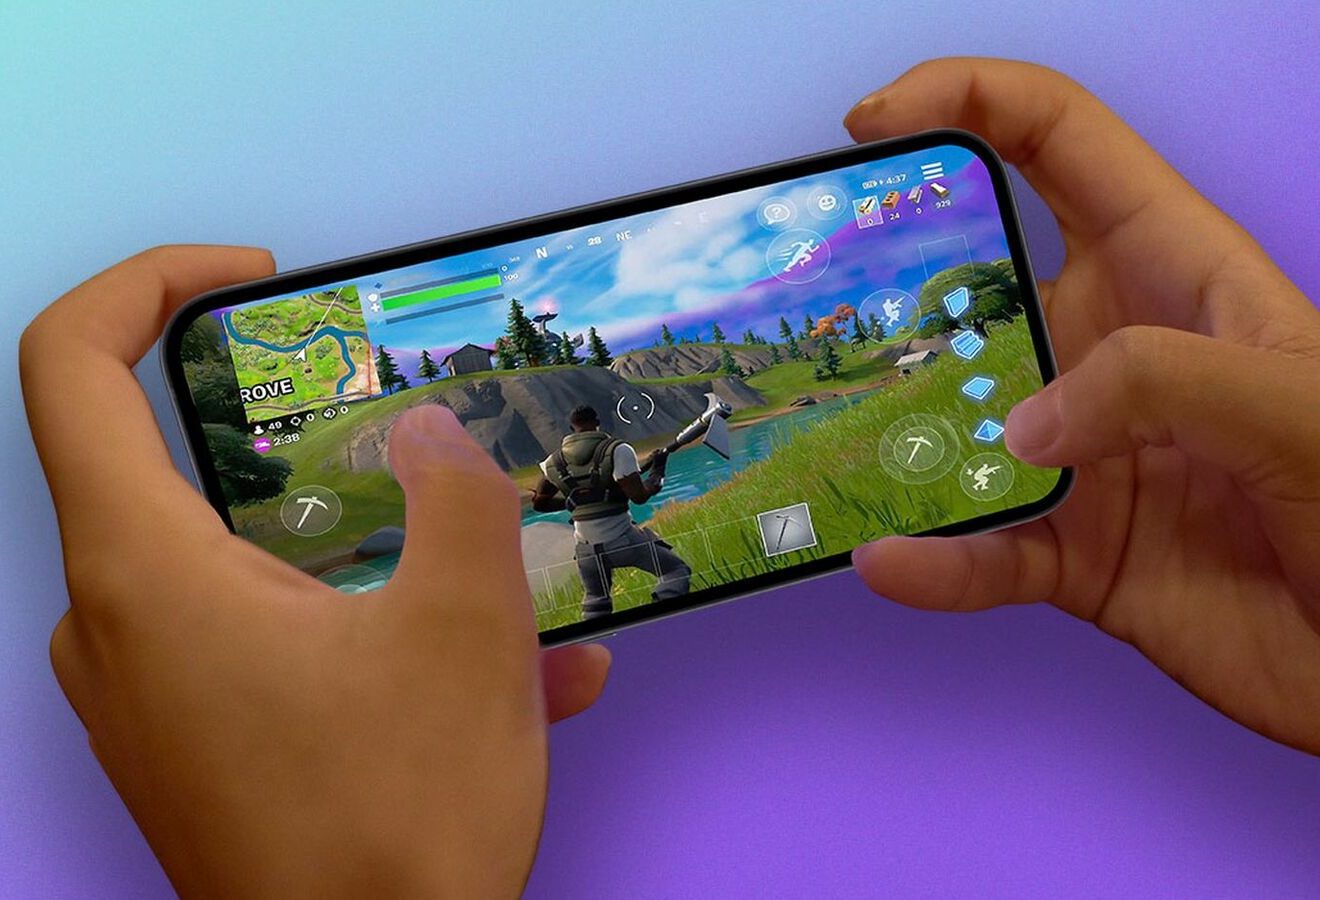 How to Play Fortnite on iOS via Xbox Cloud Gaming for FREE! Play Fortnite  on iPhone or iPad in 2022! 